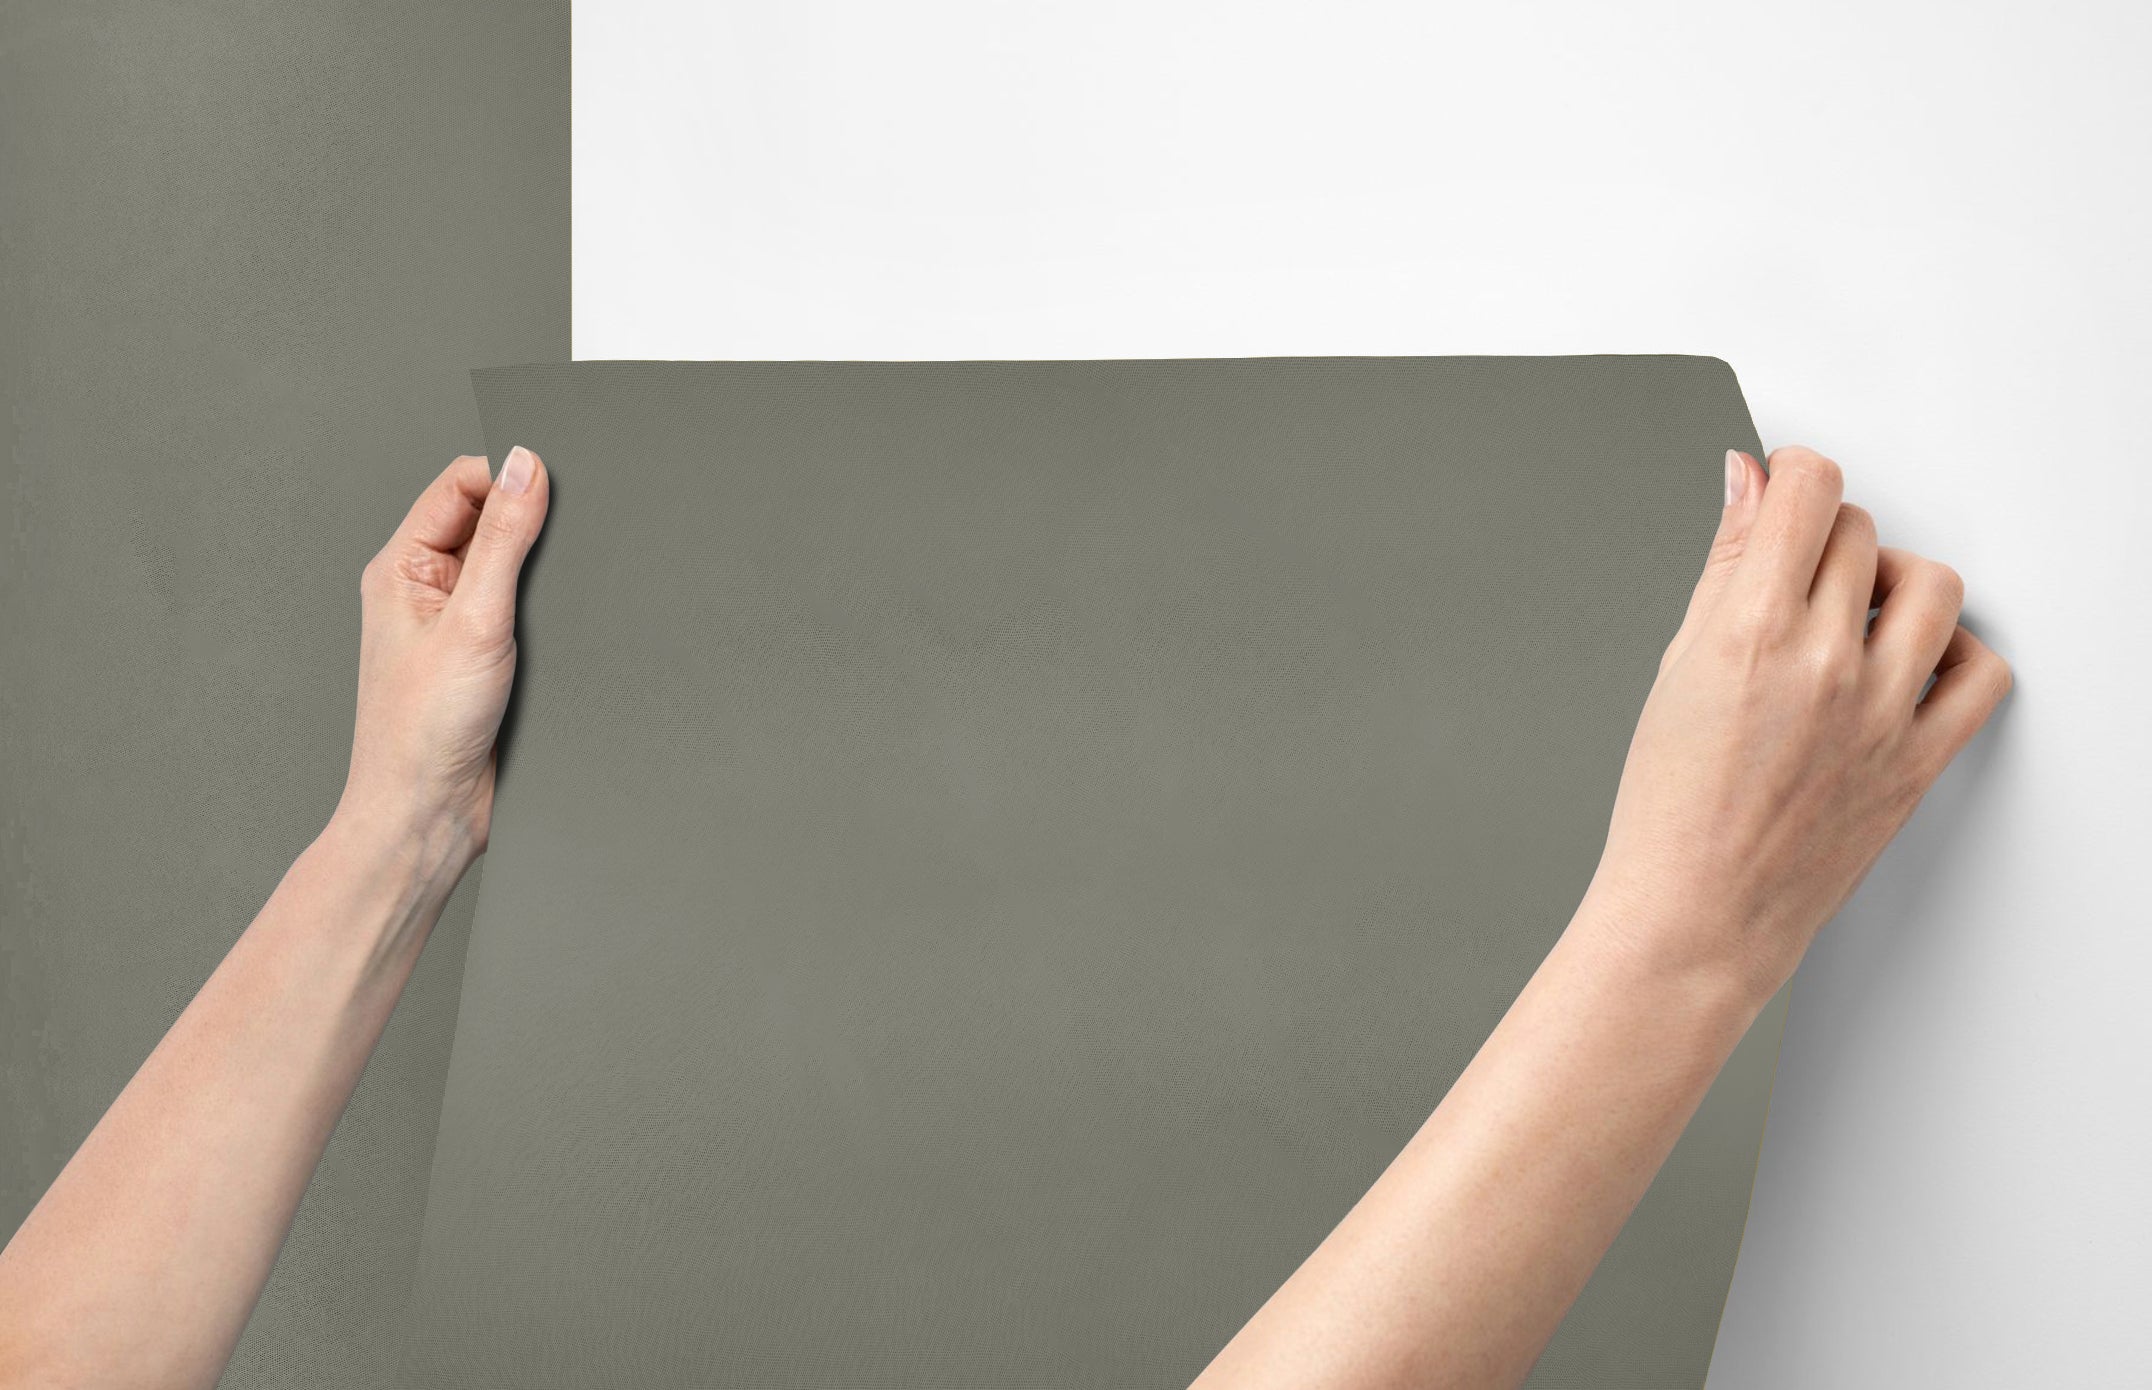 Peel & Stick Removable Re-usable Paint - Color RAL 7023 Concrete Grey - offRAL™ - RALRAW LLC, USA